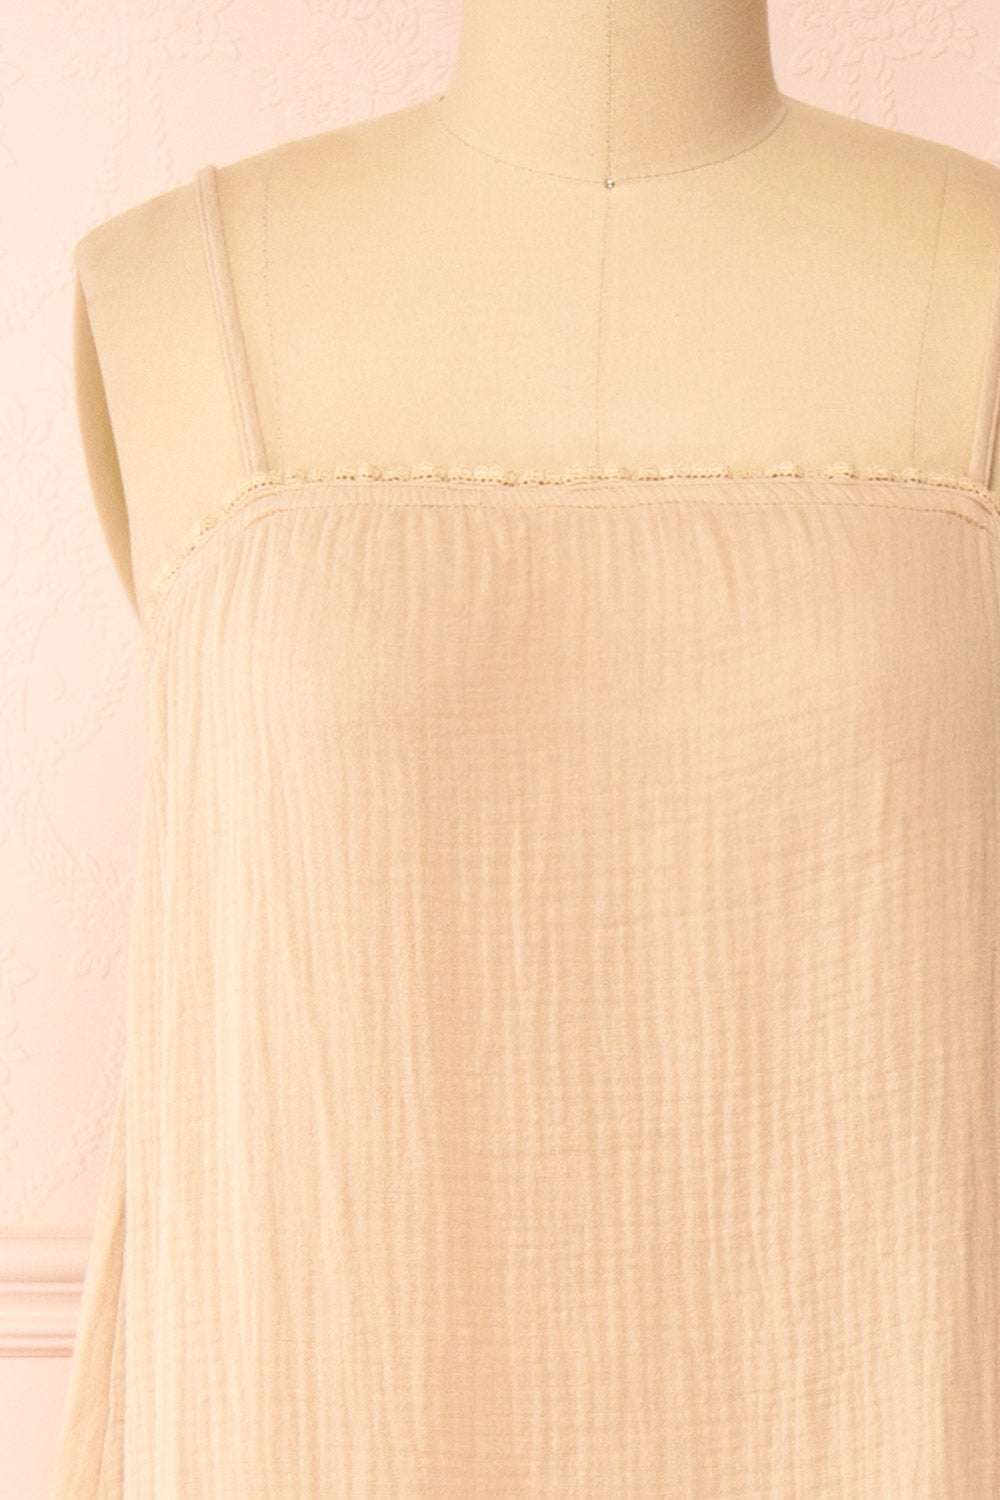 Marinet Beige Long Loose-Fitted Dress | Boutique 1861 front